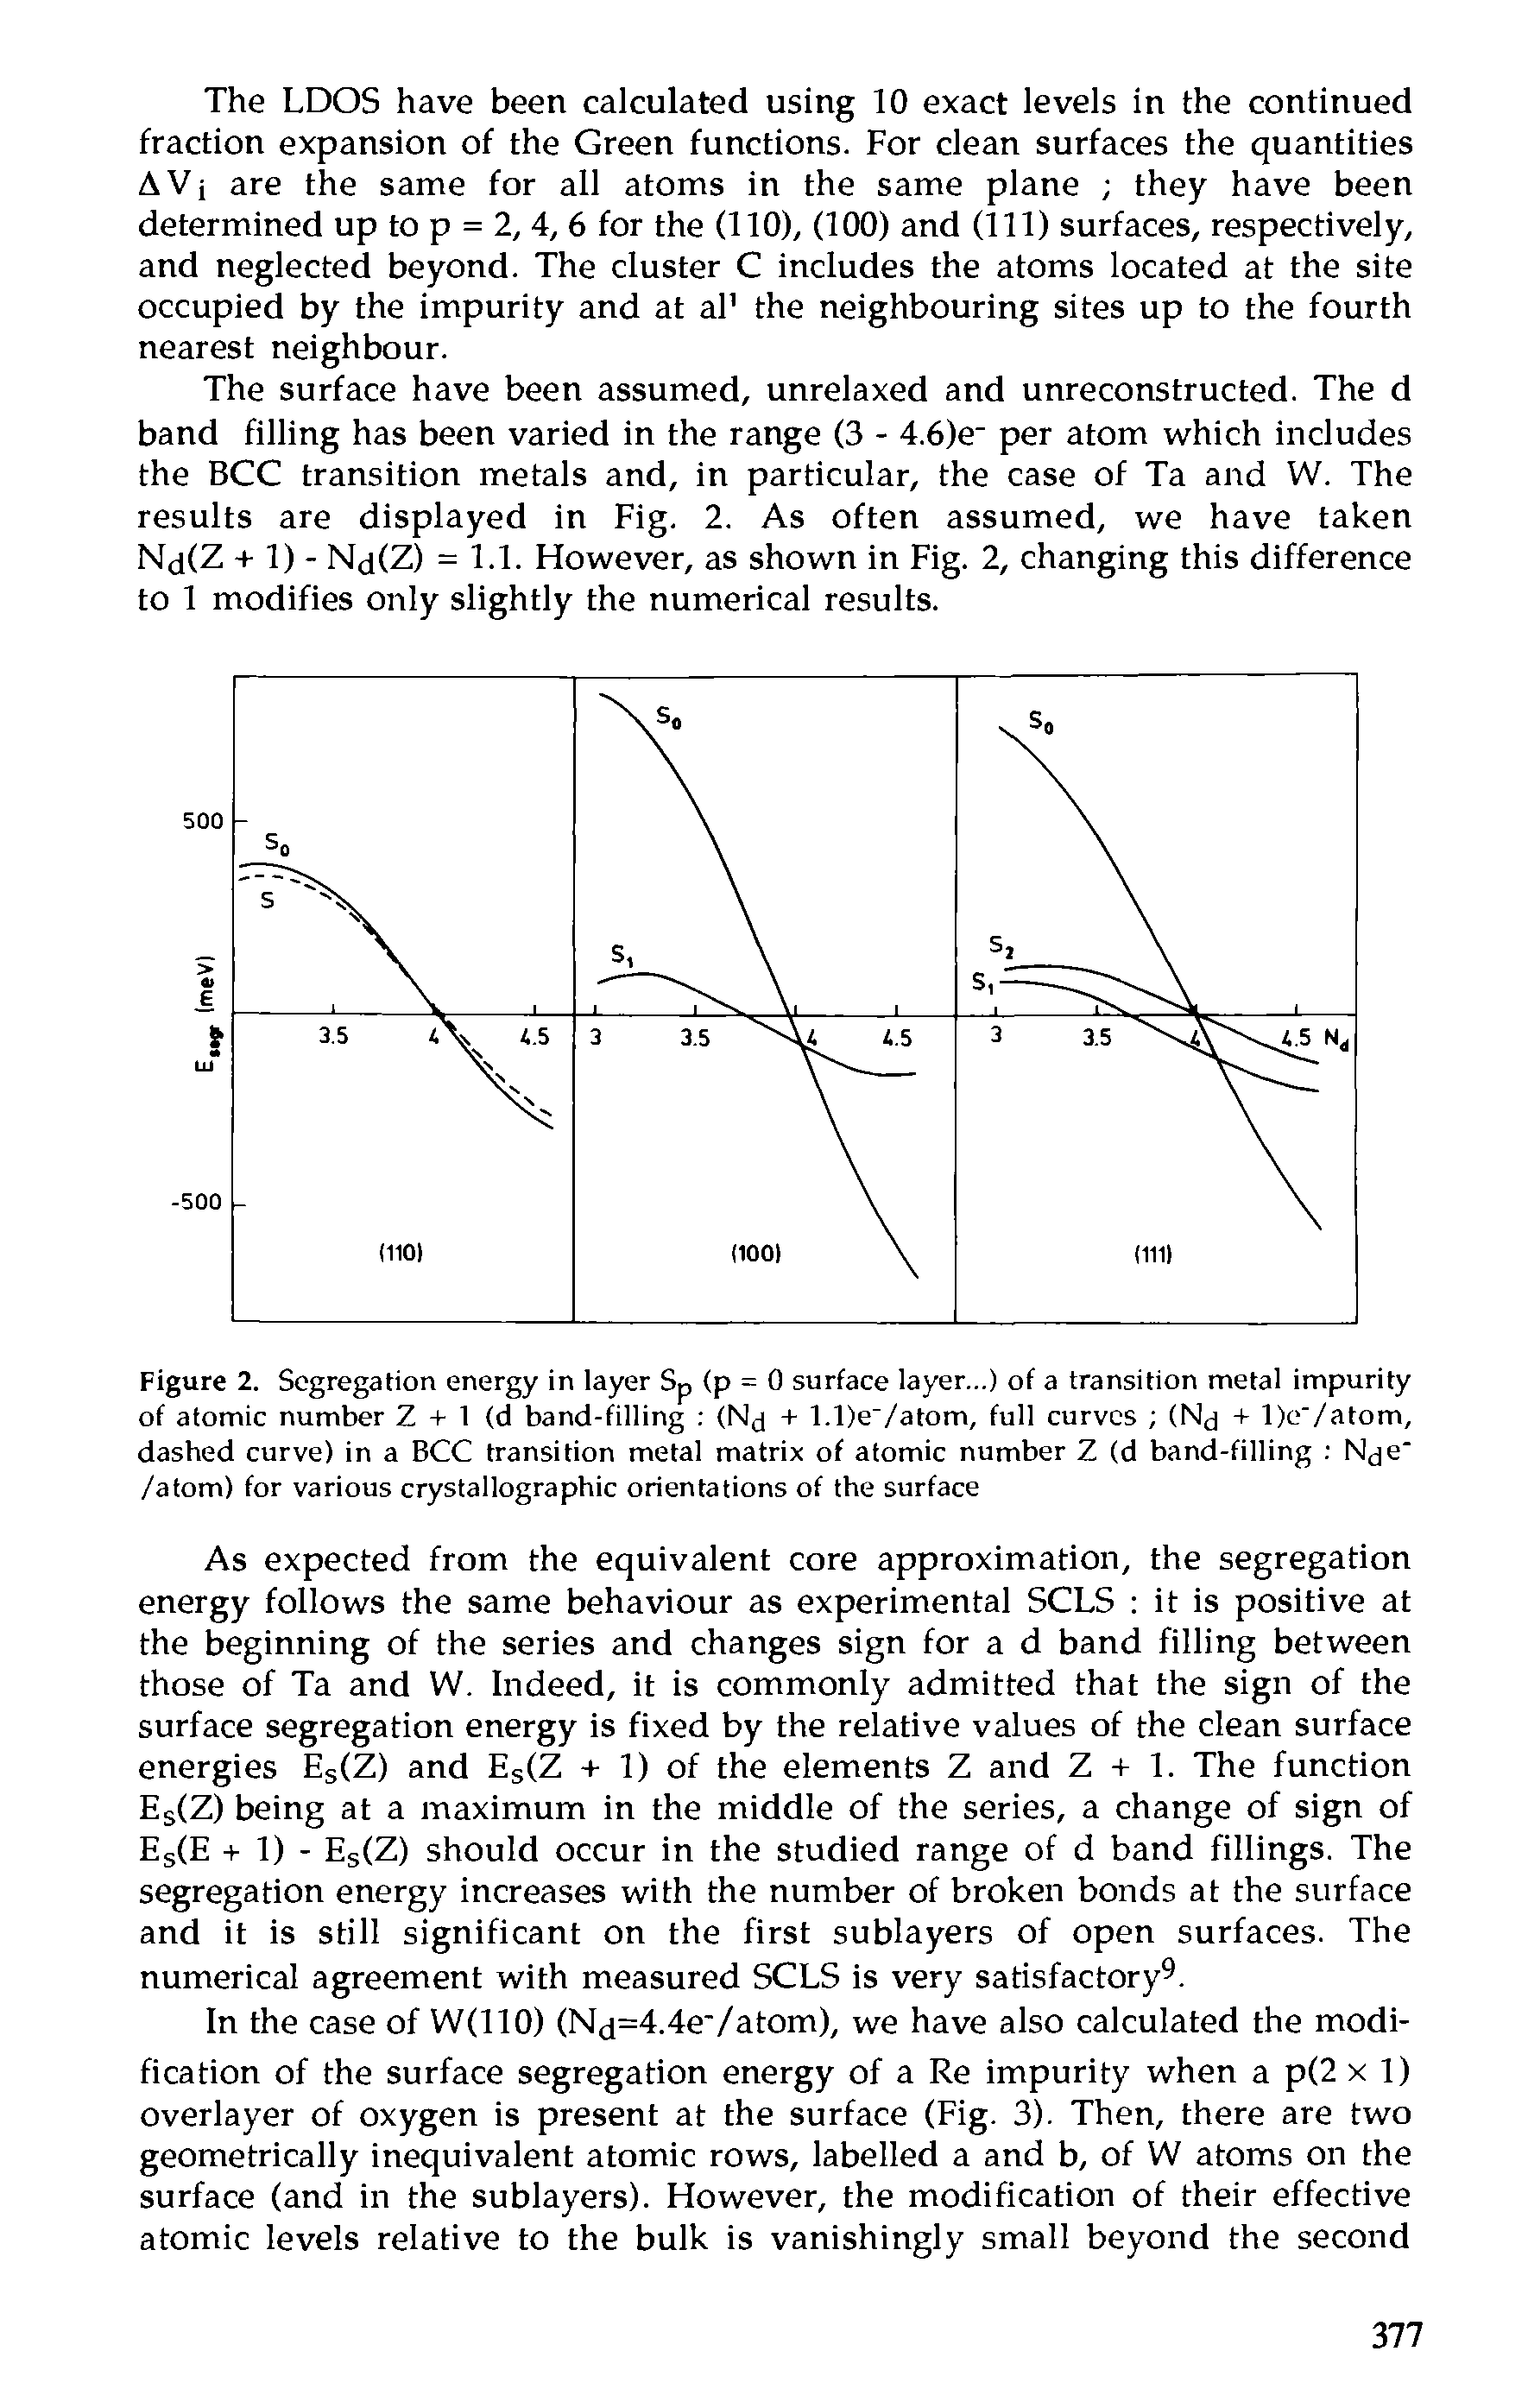 Figure 2. Segregation energy in layer Sp (p = 0 surface layer...) of a transition metal impurity of atomic number Z + 1 (d band-filling (Nj + l.l)e /atom, full curves (Nj + l)e /atom, dashed curve) in a BCC transition metal matrix of atomic number Z (d band-filling Nje" /atom) for various crystallographic orientations of the surface...